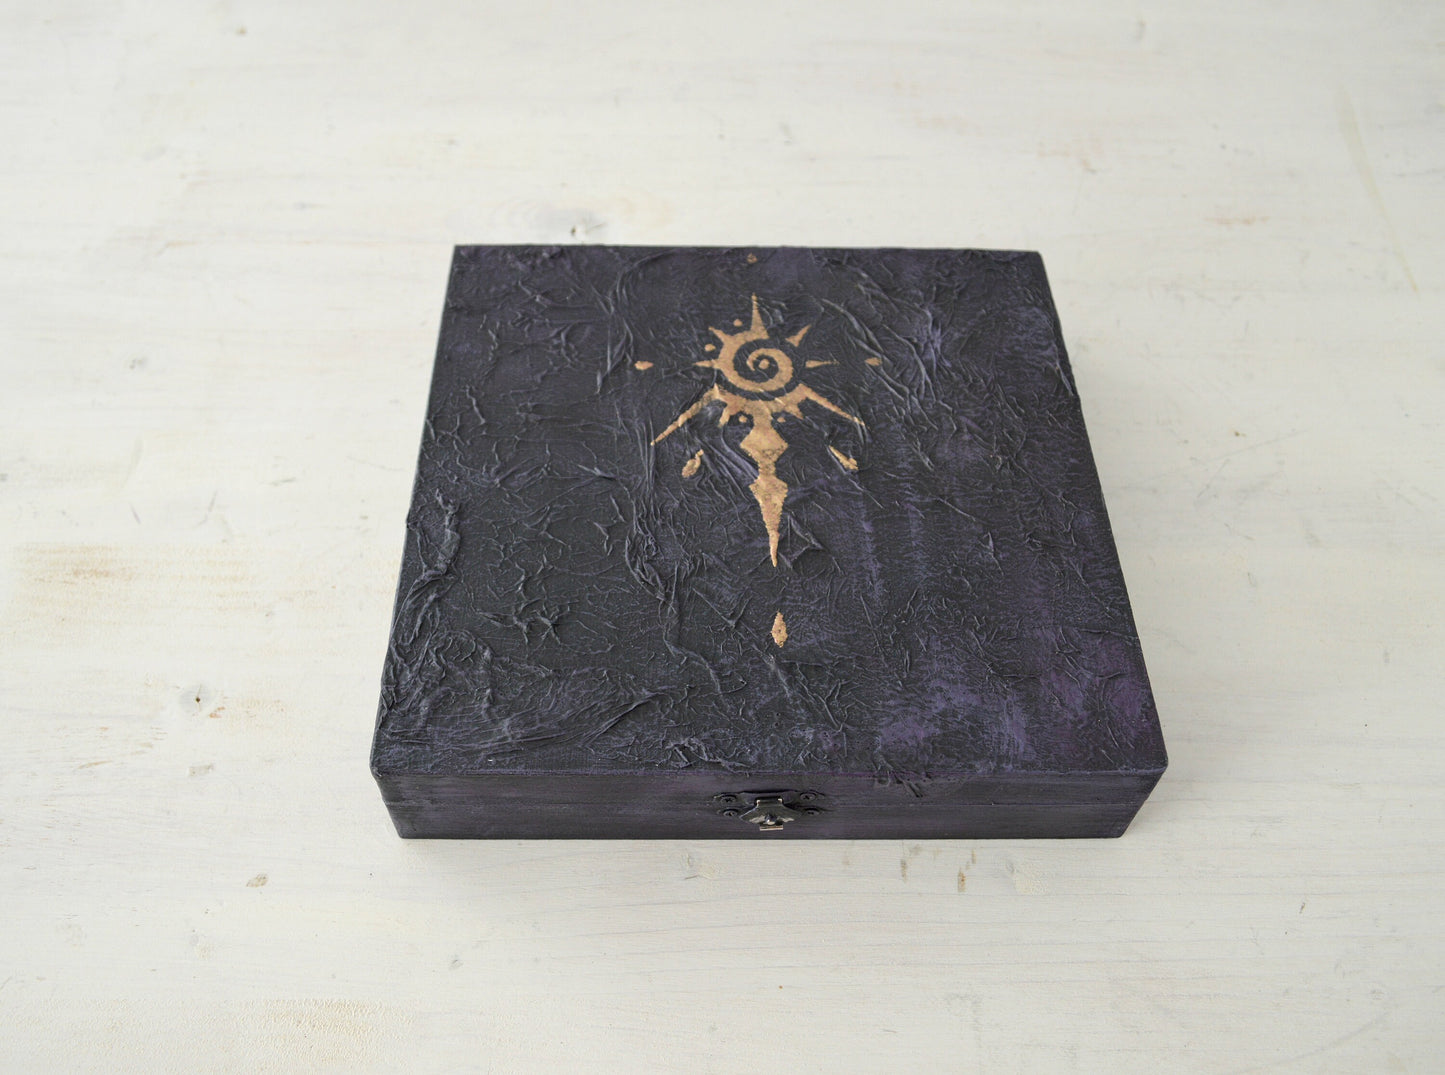 Large Square Wooden Box with Eternity Symbol, Fantasy Keepsake Spell Box, Game Master Treasure Chest Gift, Wizards decorative dice box